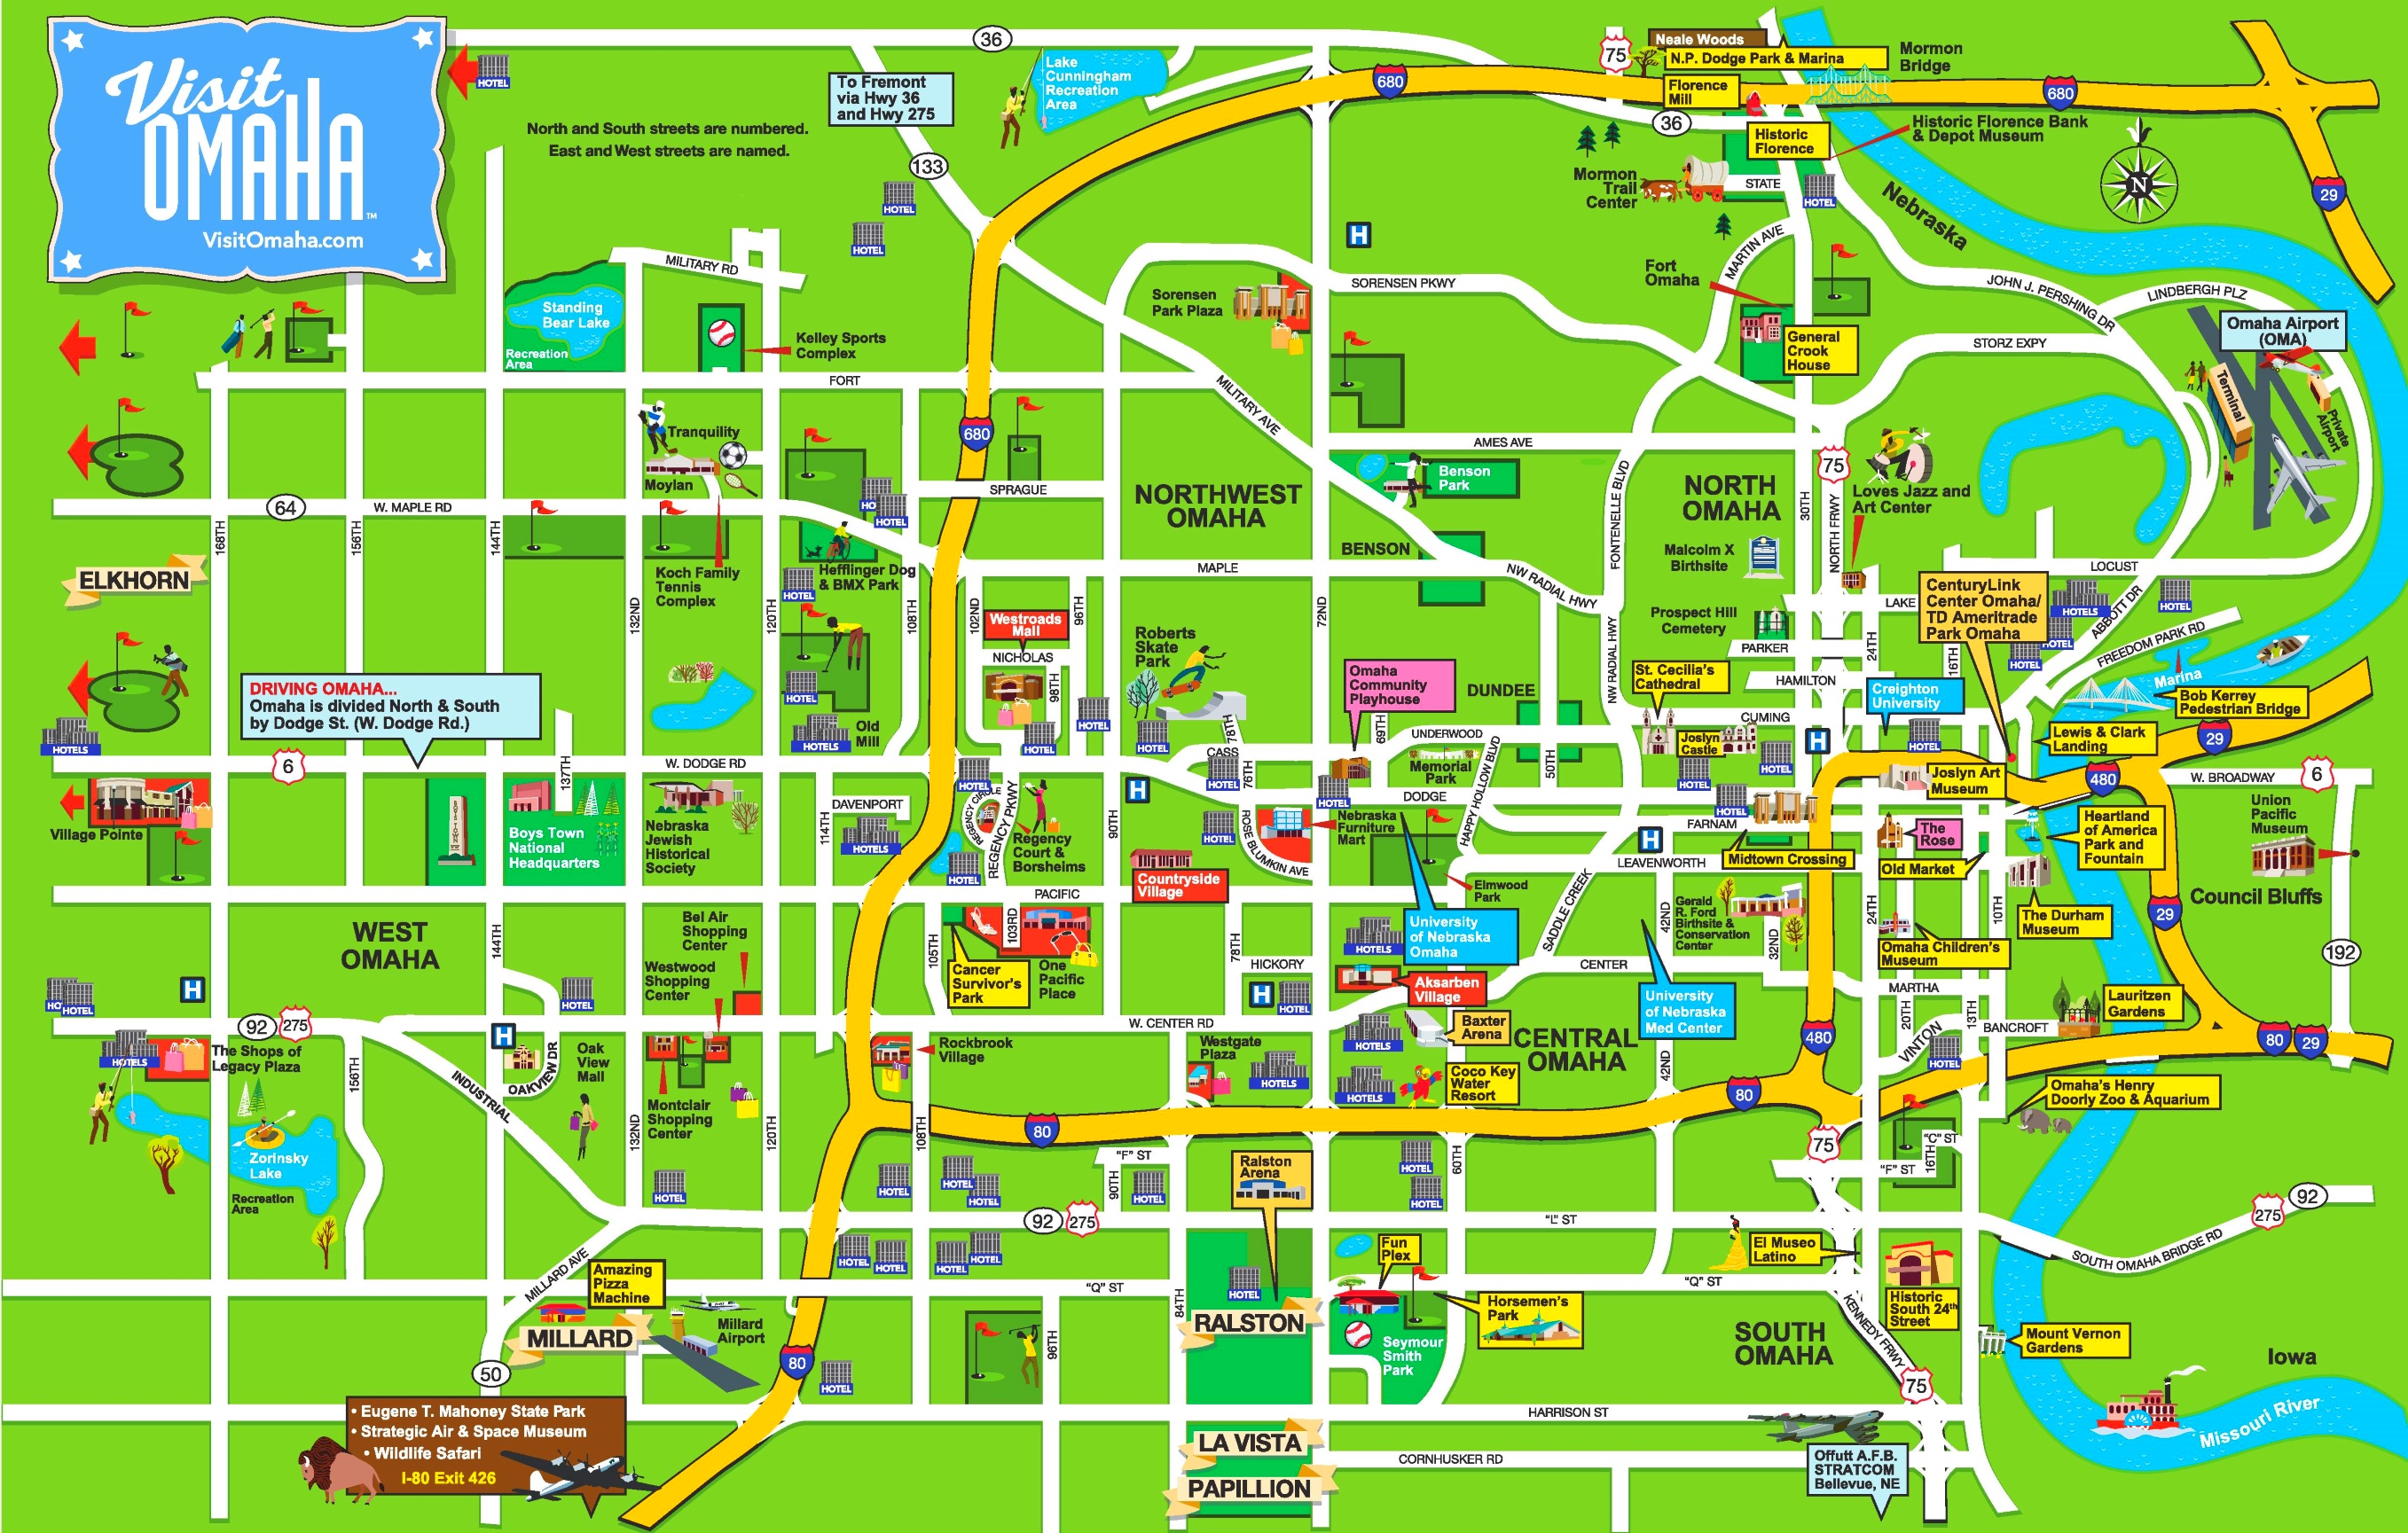 Omaha hotels and sightseeings map